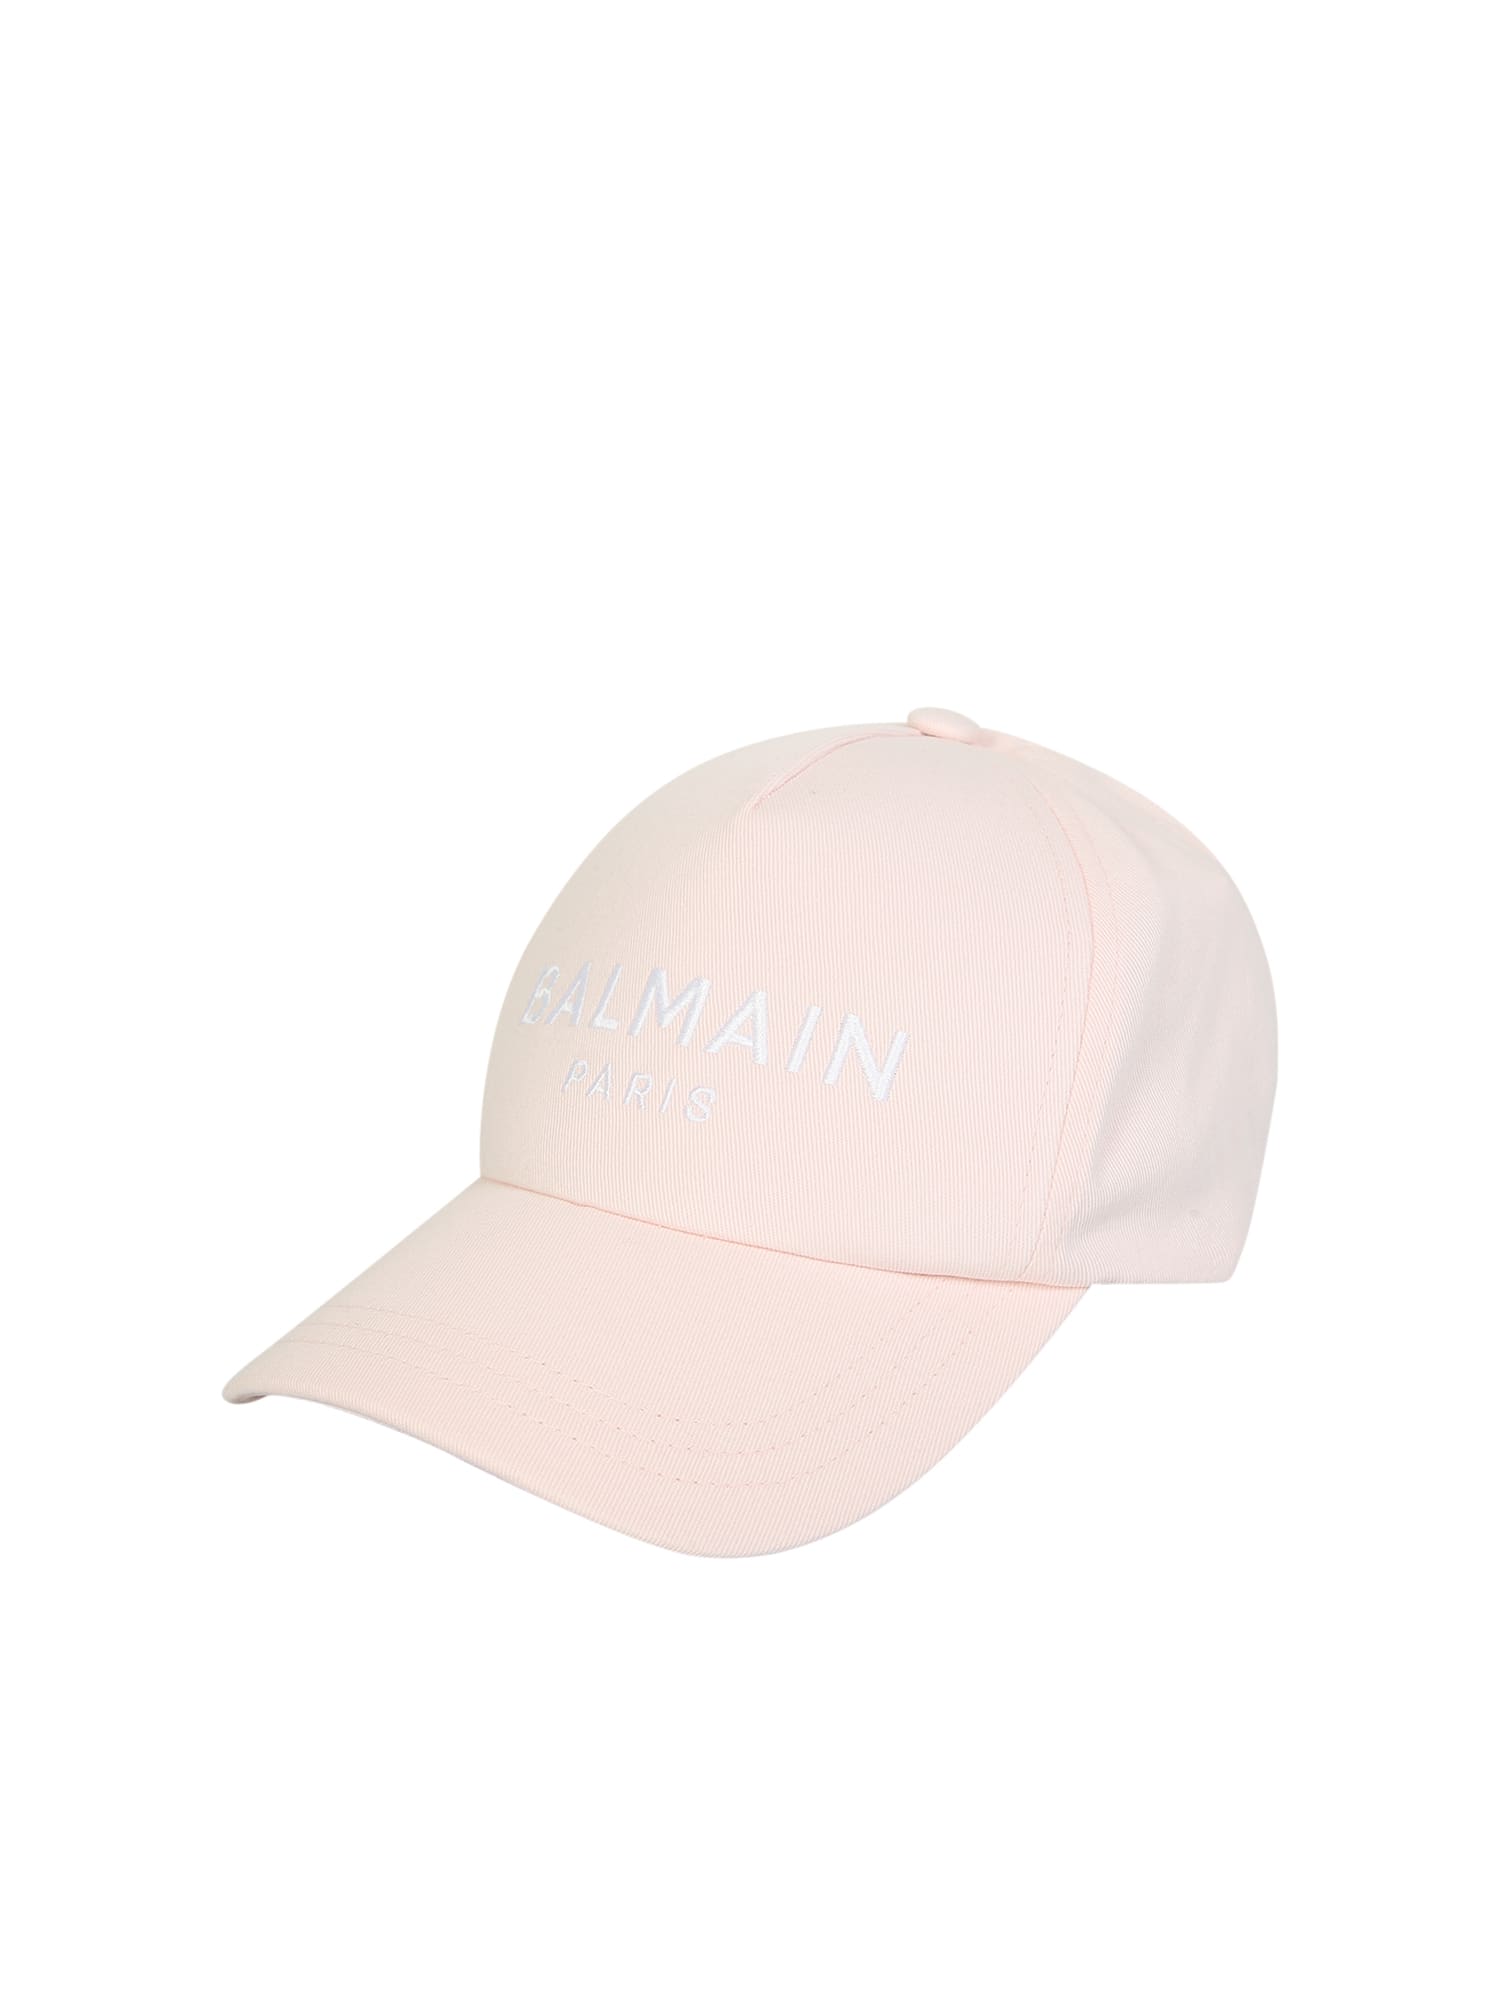 Practical Accessory With A Casual Look; Cotton Hat With Balmain Logo